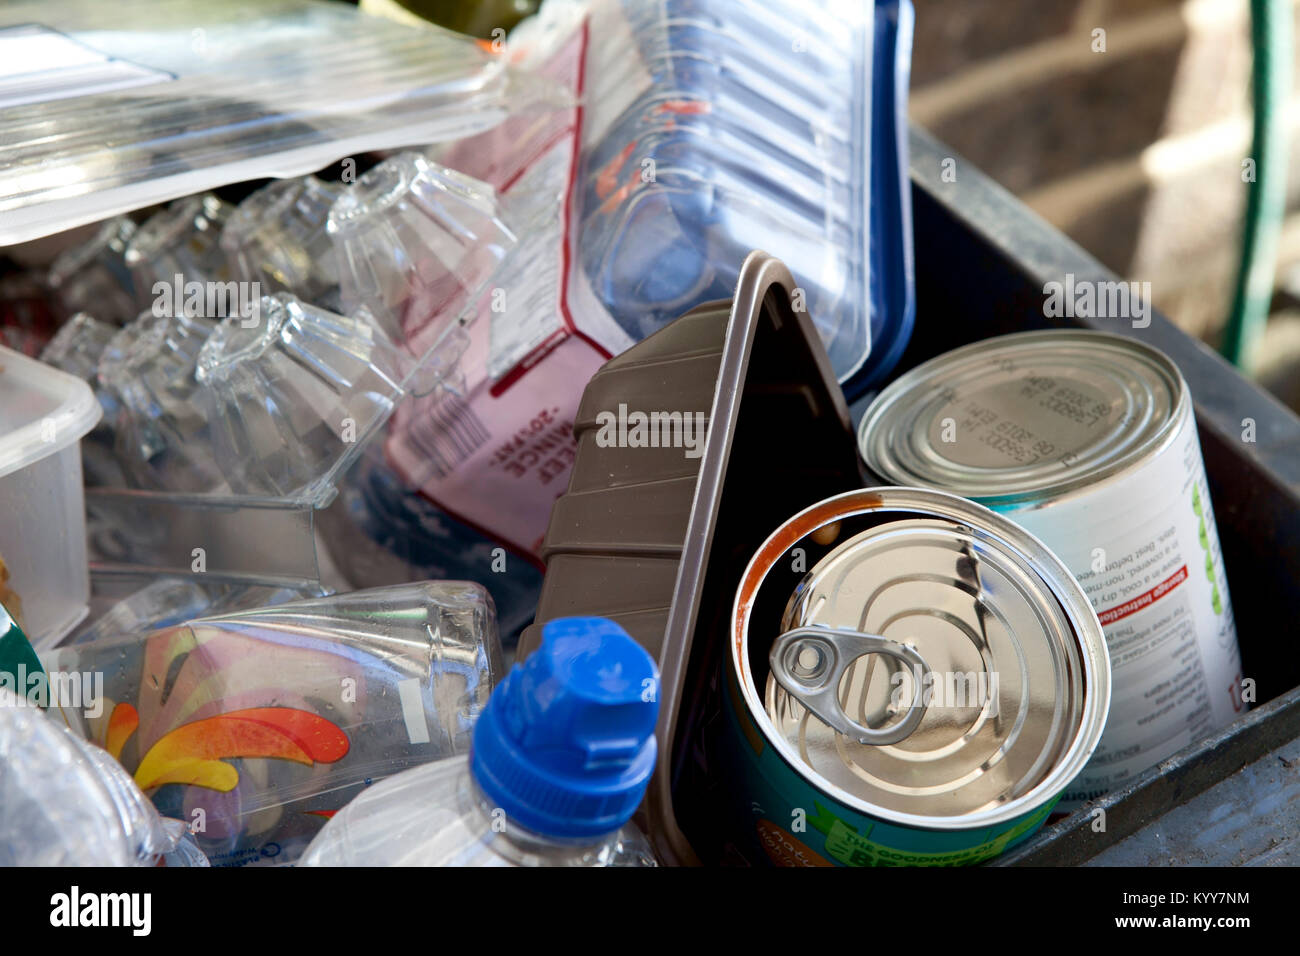 Wheelie bin full of domestic recycling waste, glass bottles, tin cans and plastic bottles, plastic waste, Recycling. Stock Photo